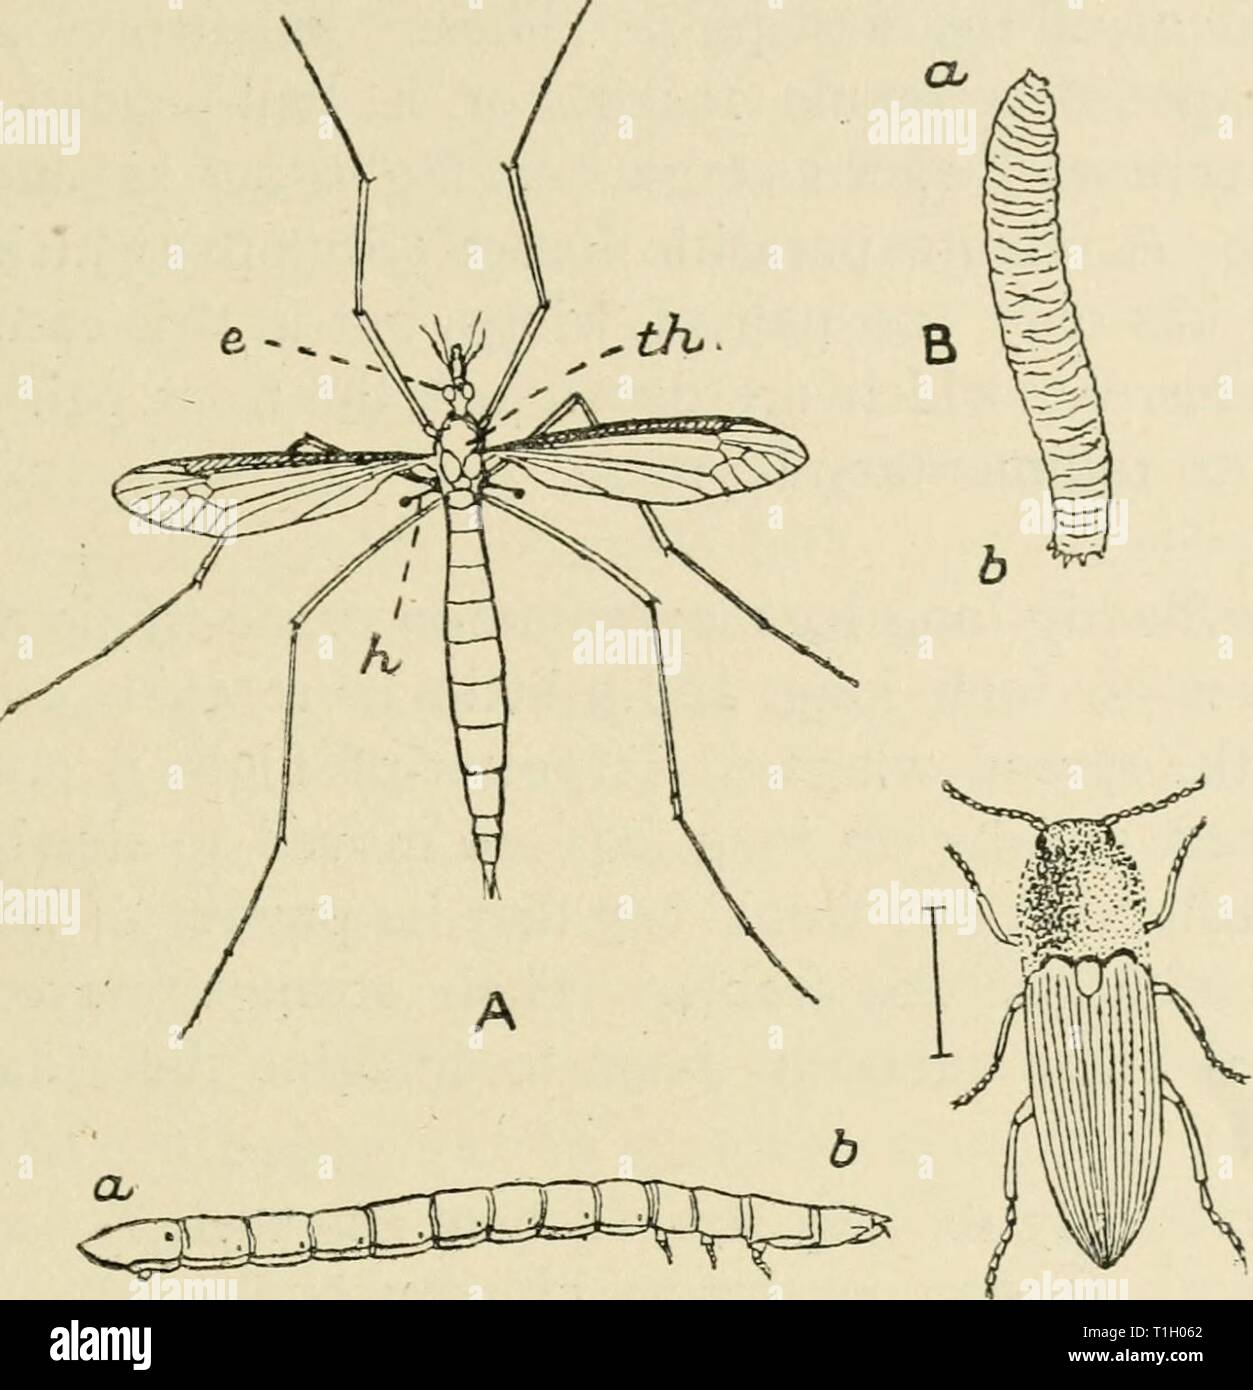 Diversions of a naturalist (1915) Diversions of a naturalist  diversionsofnatu00lank Year: 1915  DADDY-LONG-LEGS 217 size, are present in them in a very much dwindled condi- tion. Since most of our common flies are very small it is    D  Fig. 22. A, The Crane-fly (Daddy-Long-Legs), Tipula oleracea. e, the left eye ; h, one of the balancers or ' halteres,' which are th, the thorax. Natural the modified second pair of wings ; head B, The 'Leather-jacket,' the grub of the crane-fly. b, tail. Natural size. C, The Click-beetle or Skip-jack, Elater obscurus. The line beside it shows its natural size Stock Photo